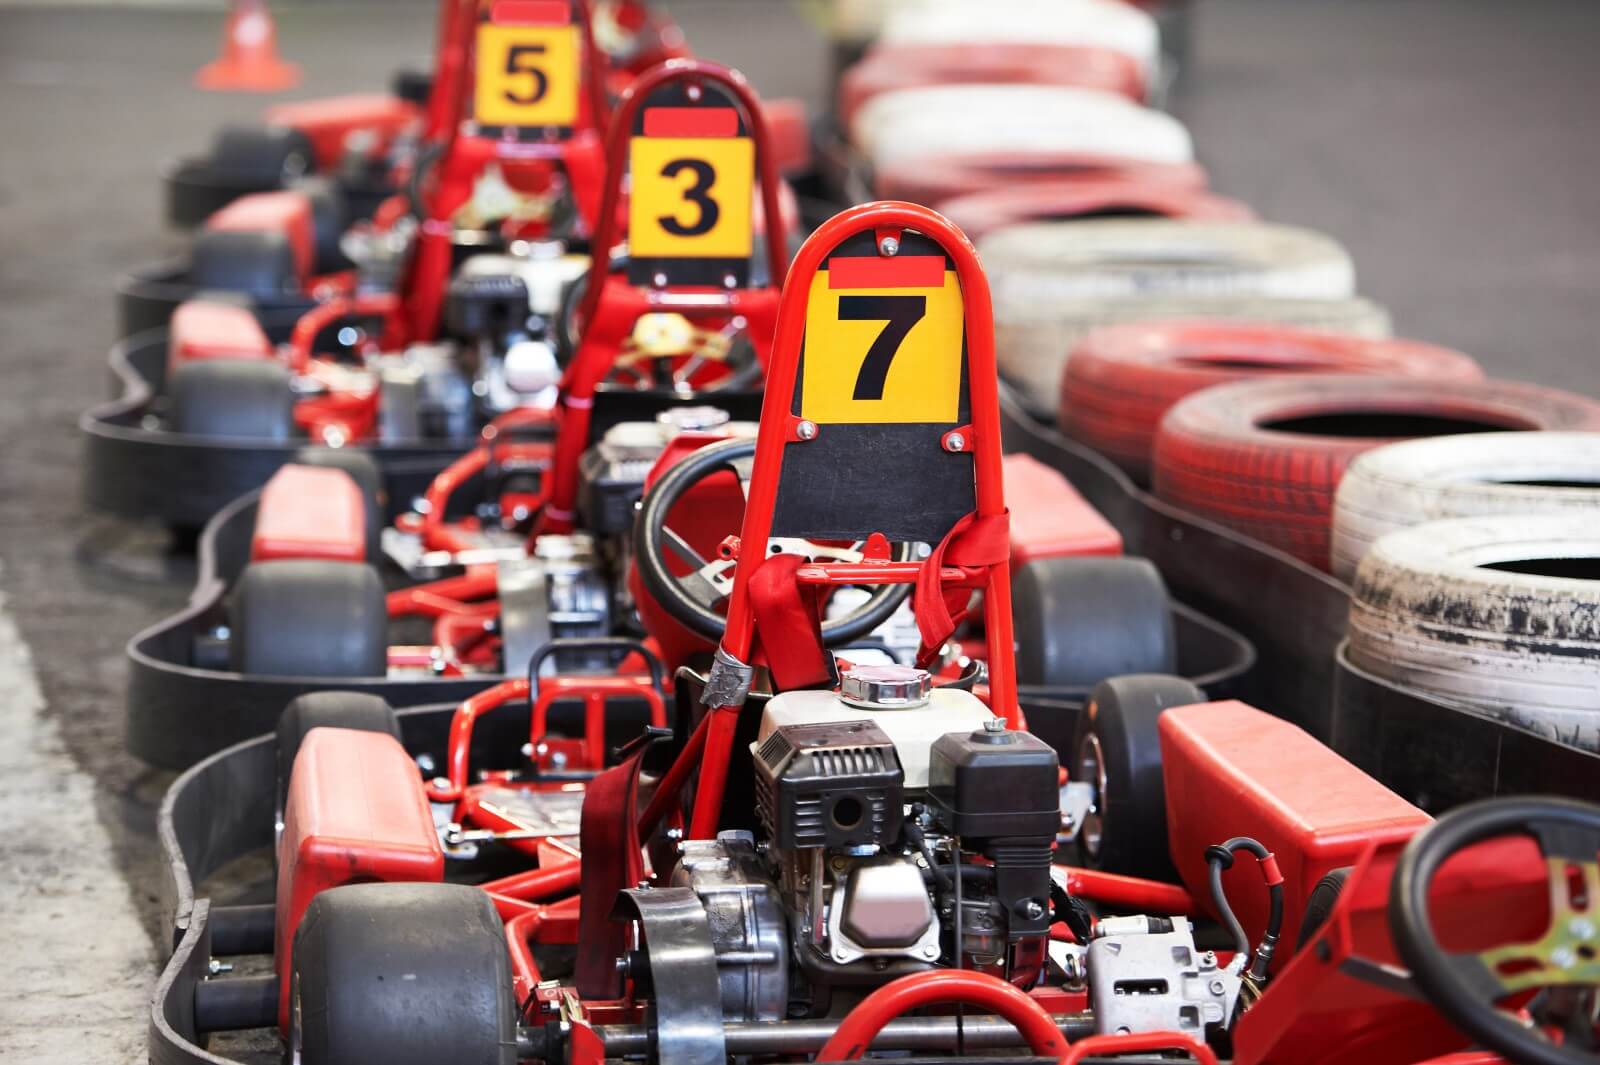 Red go karts in a line.